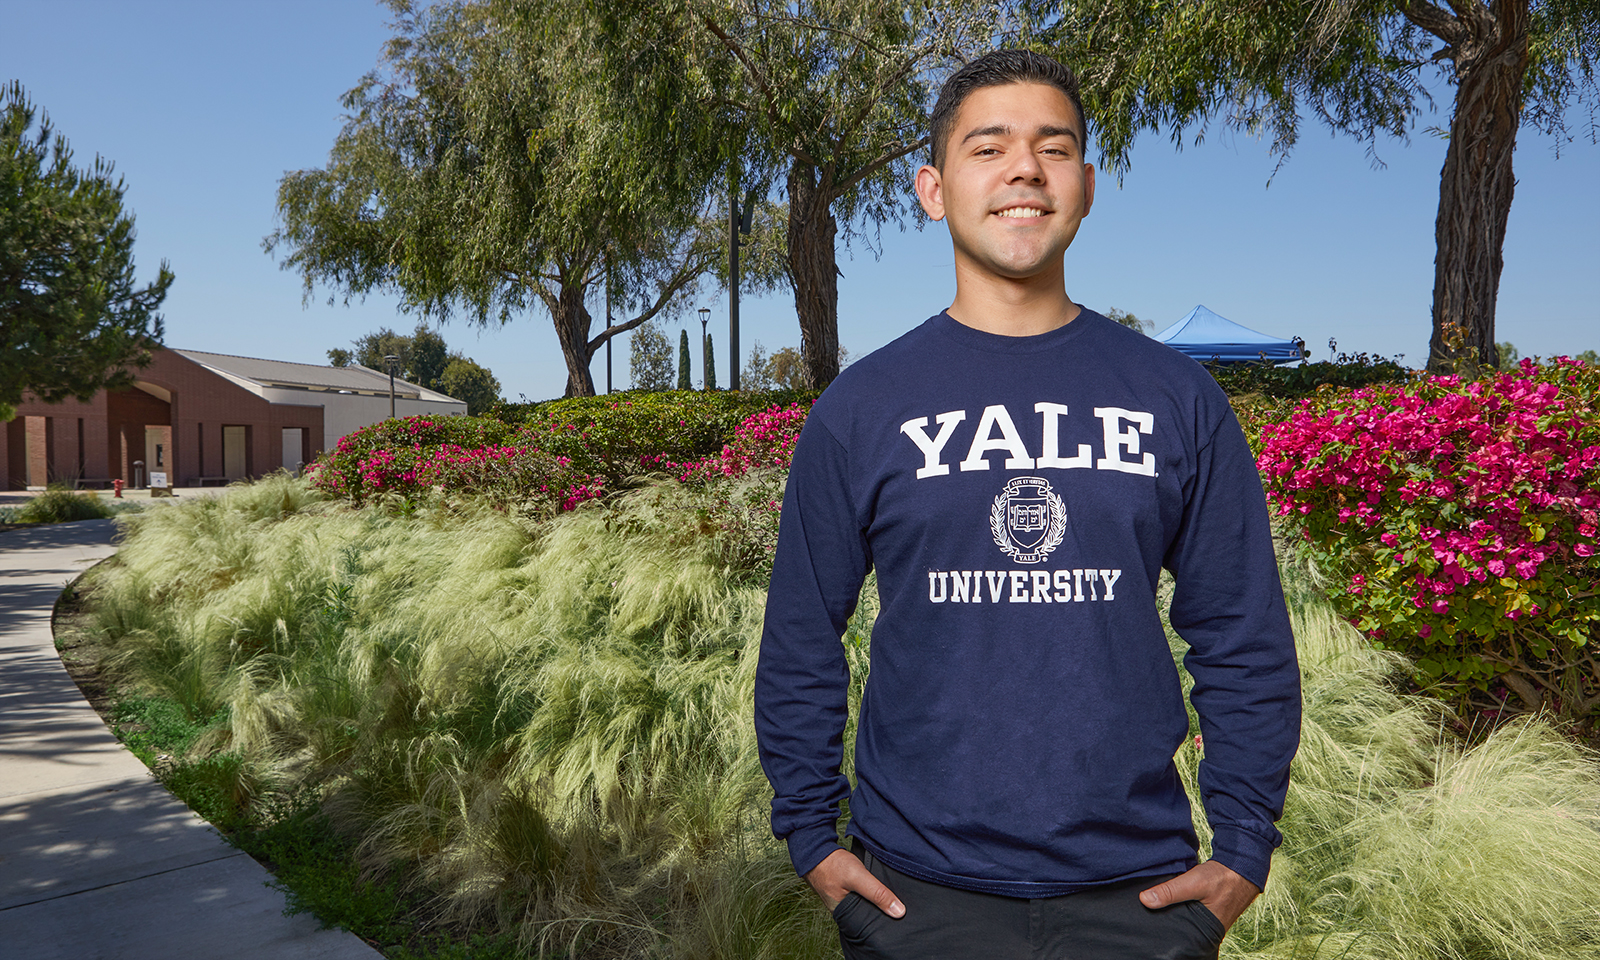 Yale welcomes Irvine Valley grad